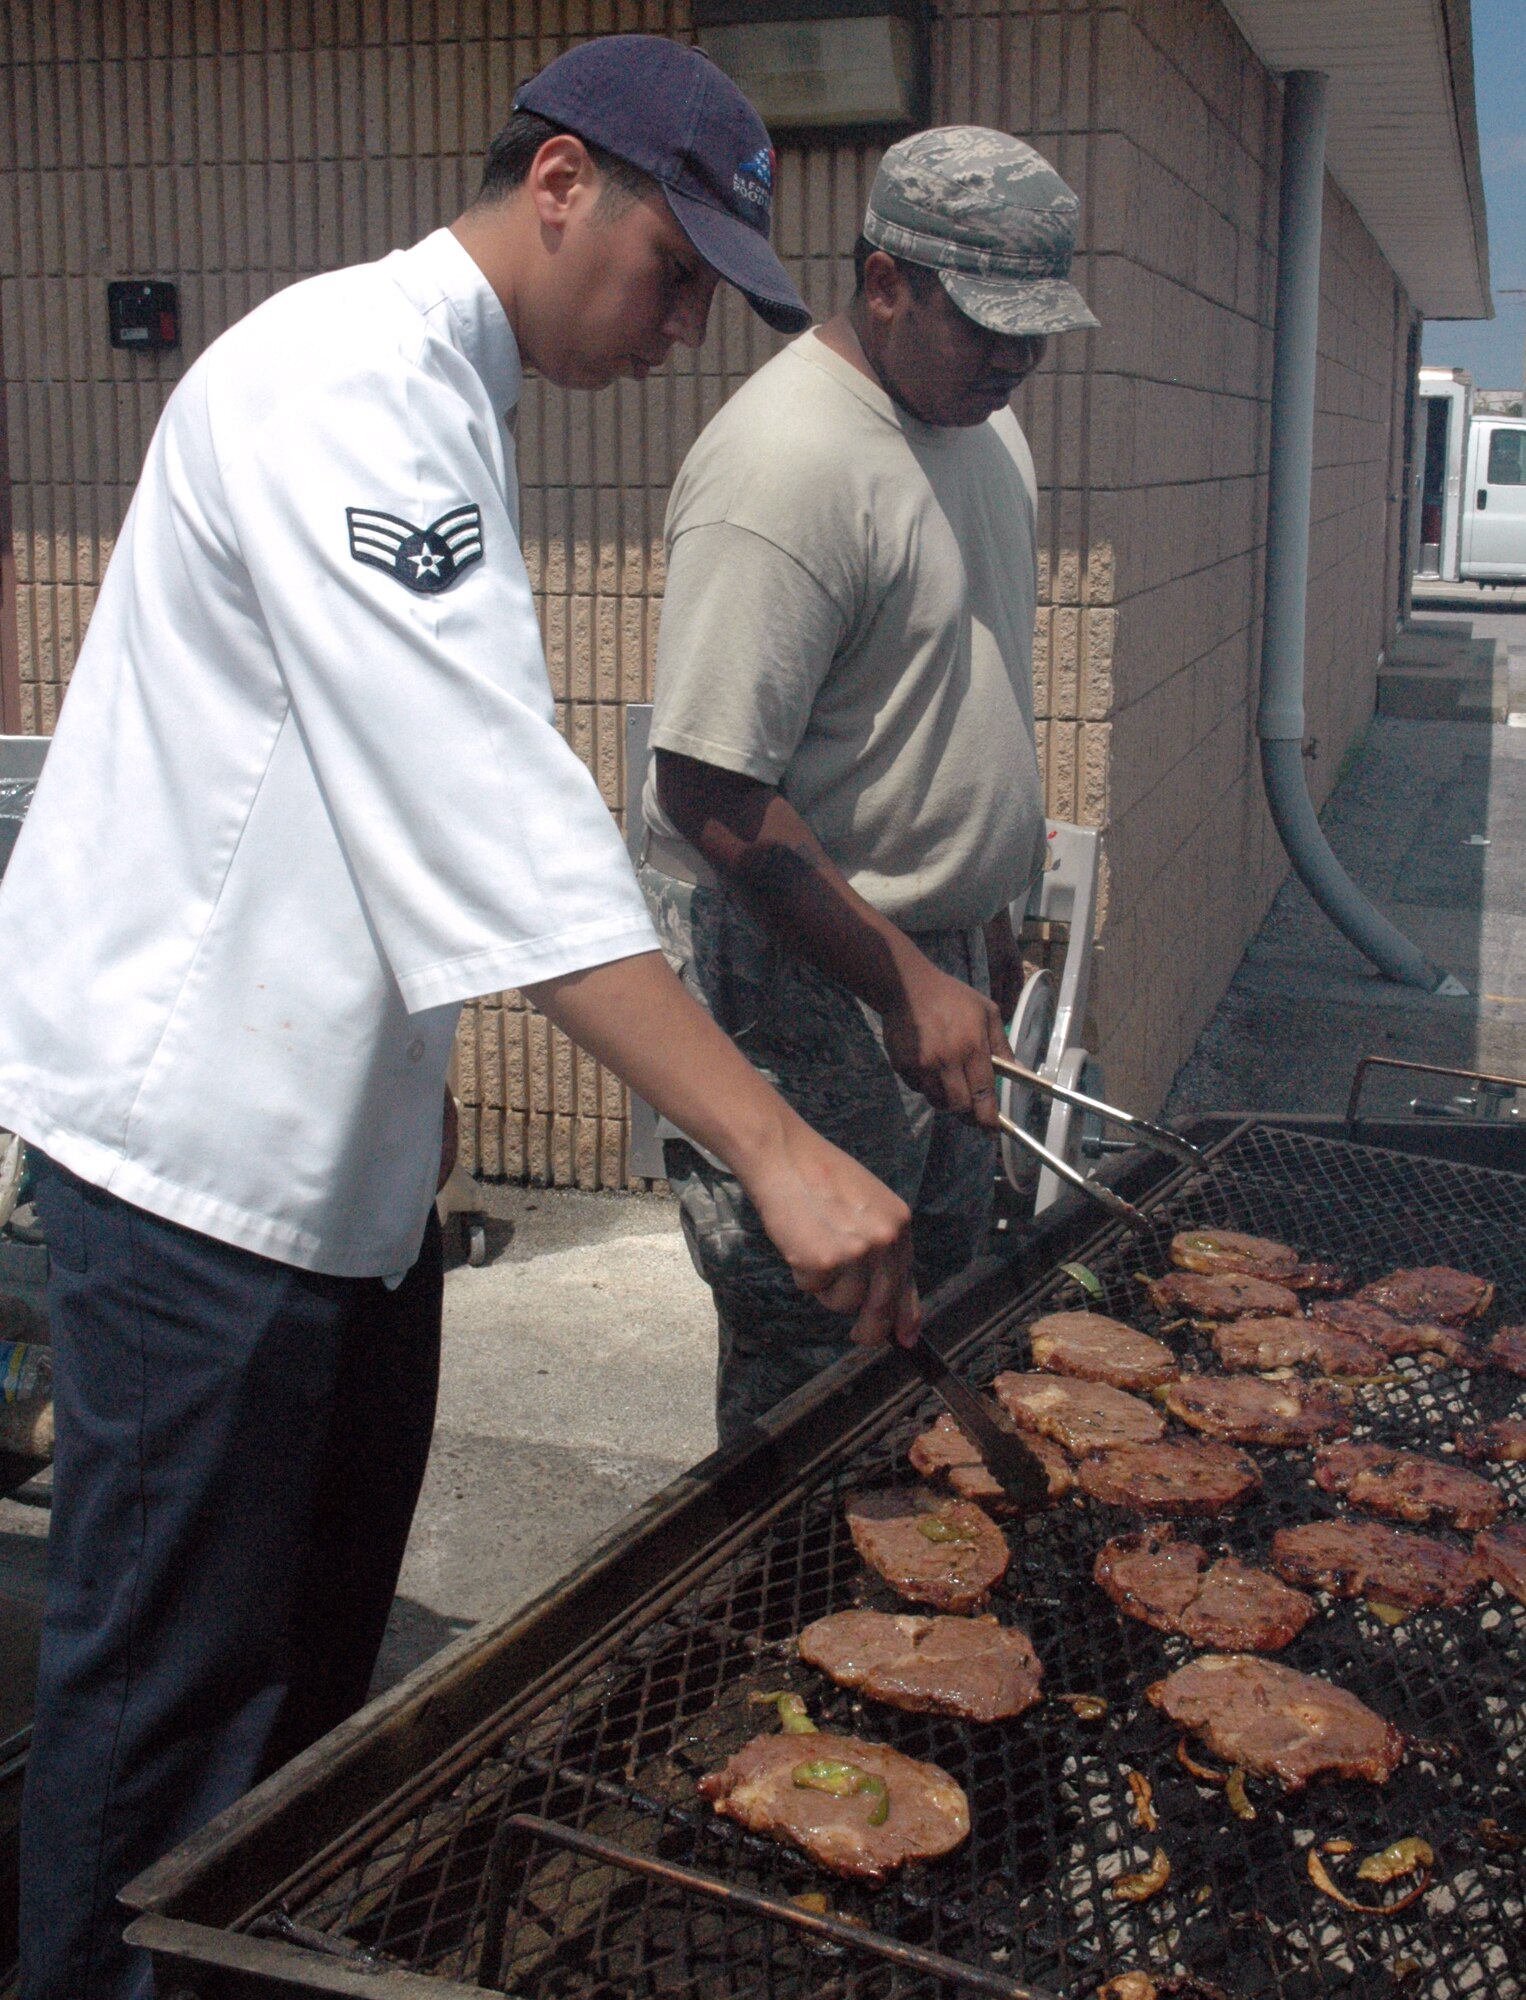 Tyndall AFB, Fla. - Staff Sgt. Dennis Beck, 325th Force Support Squadron and Senior Airman Elias Peredo prepare steaks for the Flight Line Appreciation Meal on Aug. 26 from 10:30 a.m. to 1:30 p.m. Servicemembers who work on the flight line received a free lunch that included steak and shrimp with several tasty side dishes.   